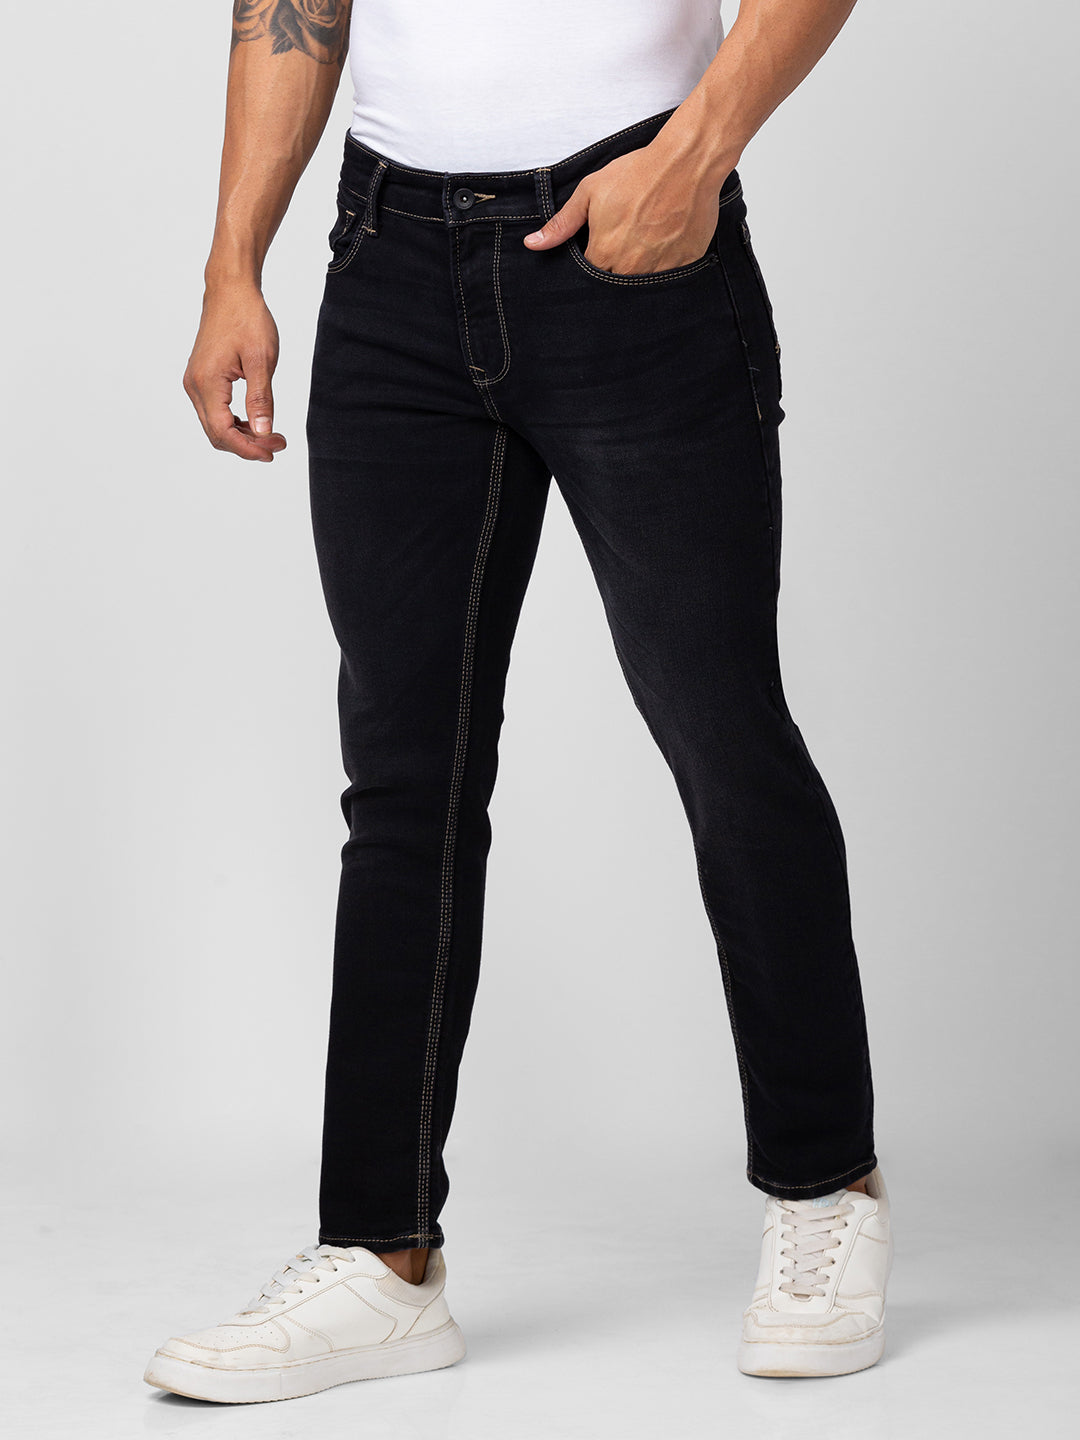 Occult Jeans - Cotton stretch narrow fit six pocket jeans. Style Number :  21092B Color: Black Material : Cotton Stretch To place online order visit  us here:  pocket-jeans-black/ Now